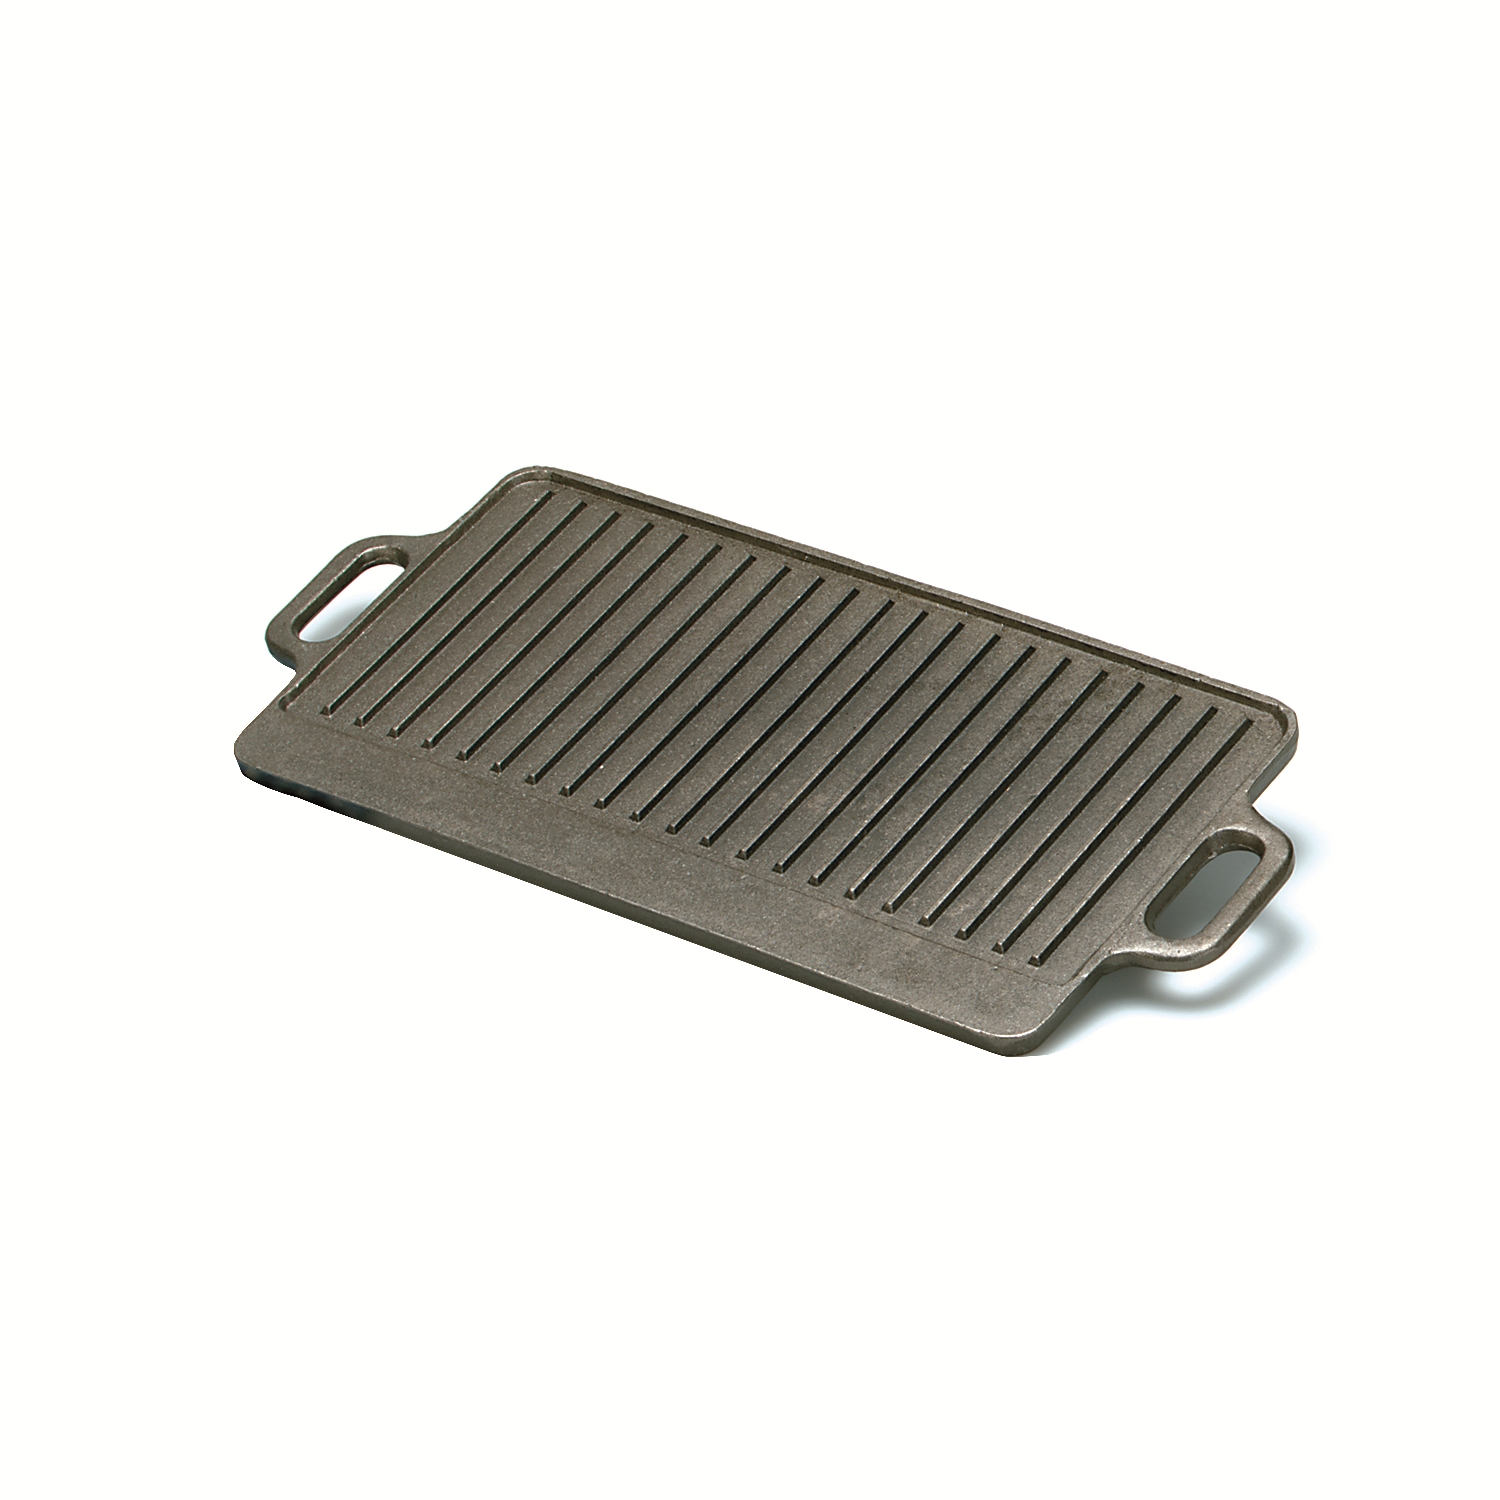 Texsport Cast Iron Griddle 14502 9.5 in. x 20 in.